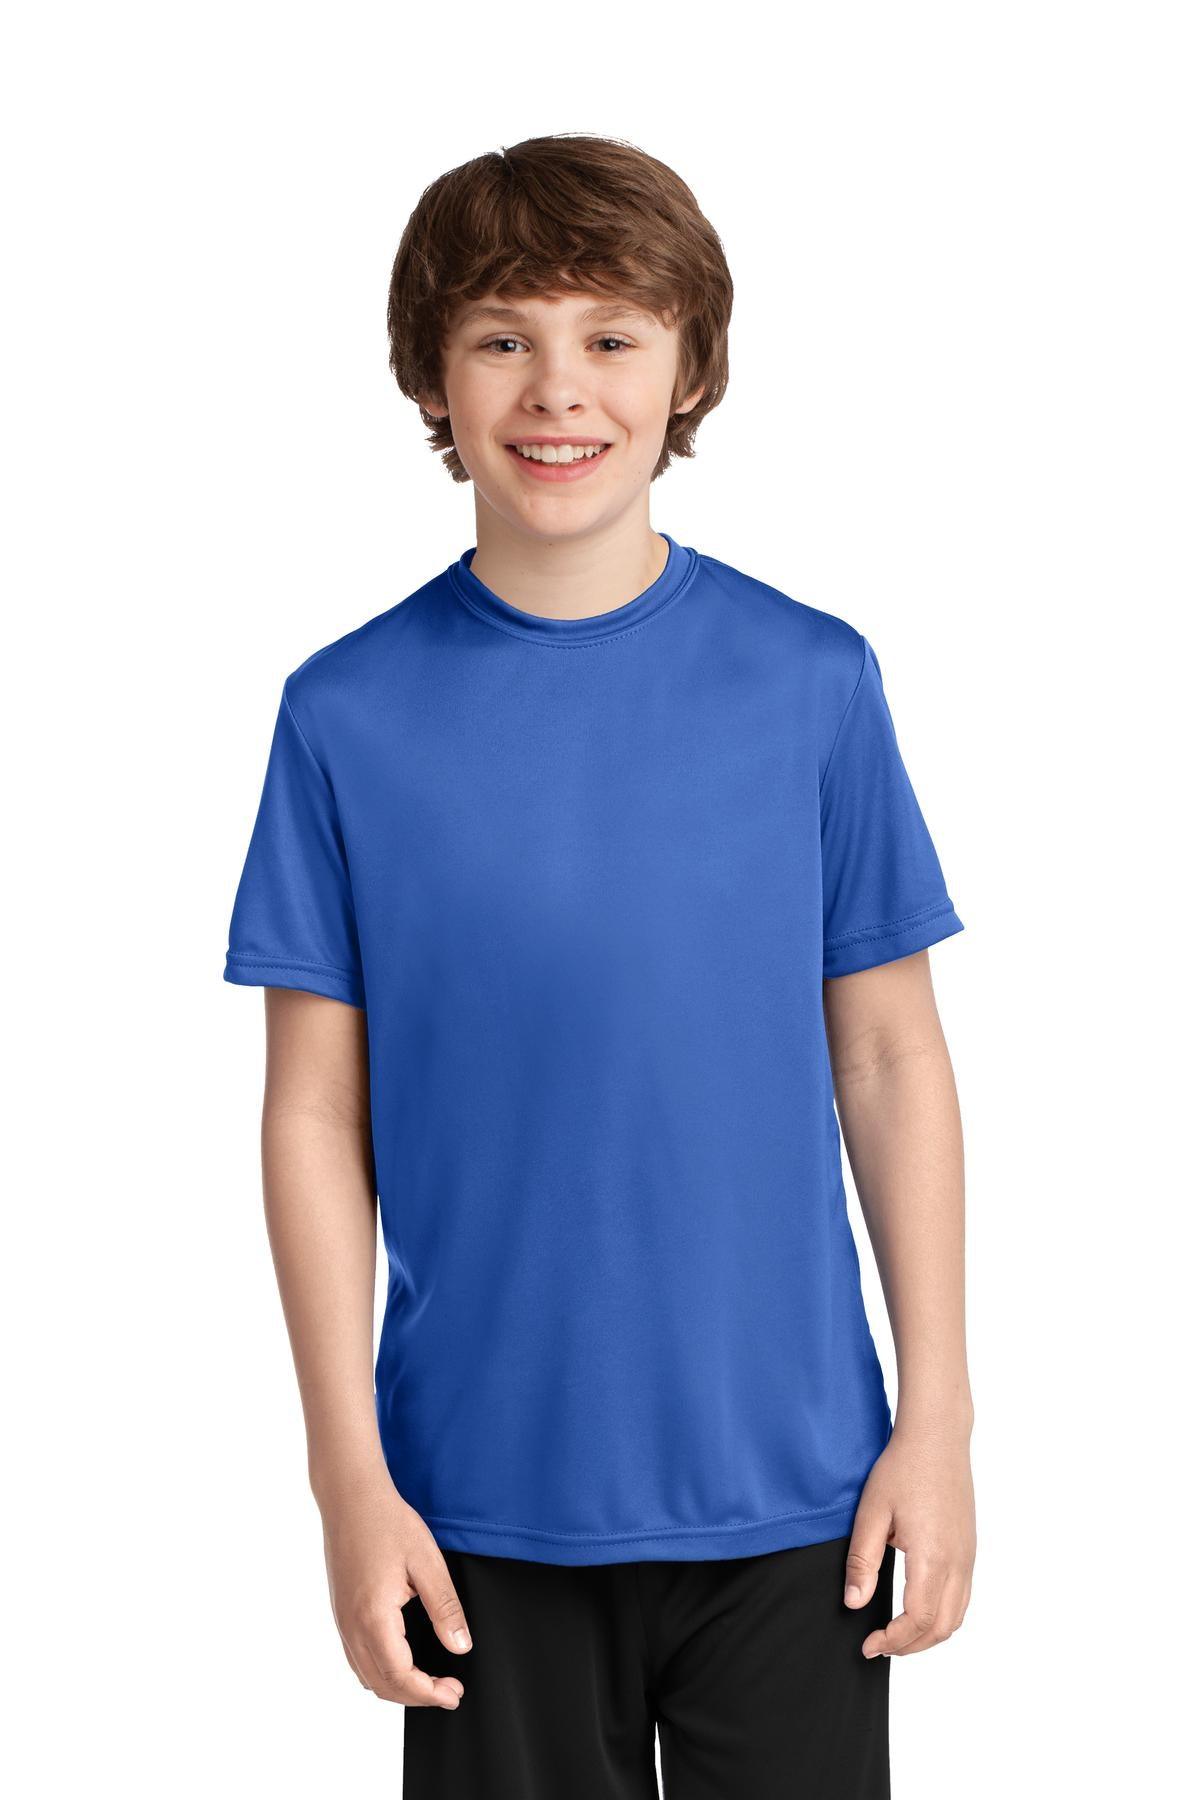 Port & Company Youth Performance Tee. PC380Y - Dresses Max